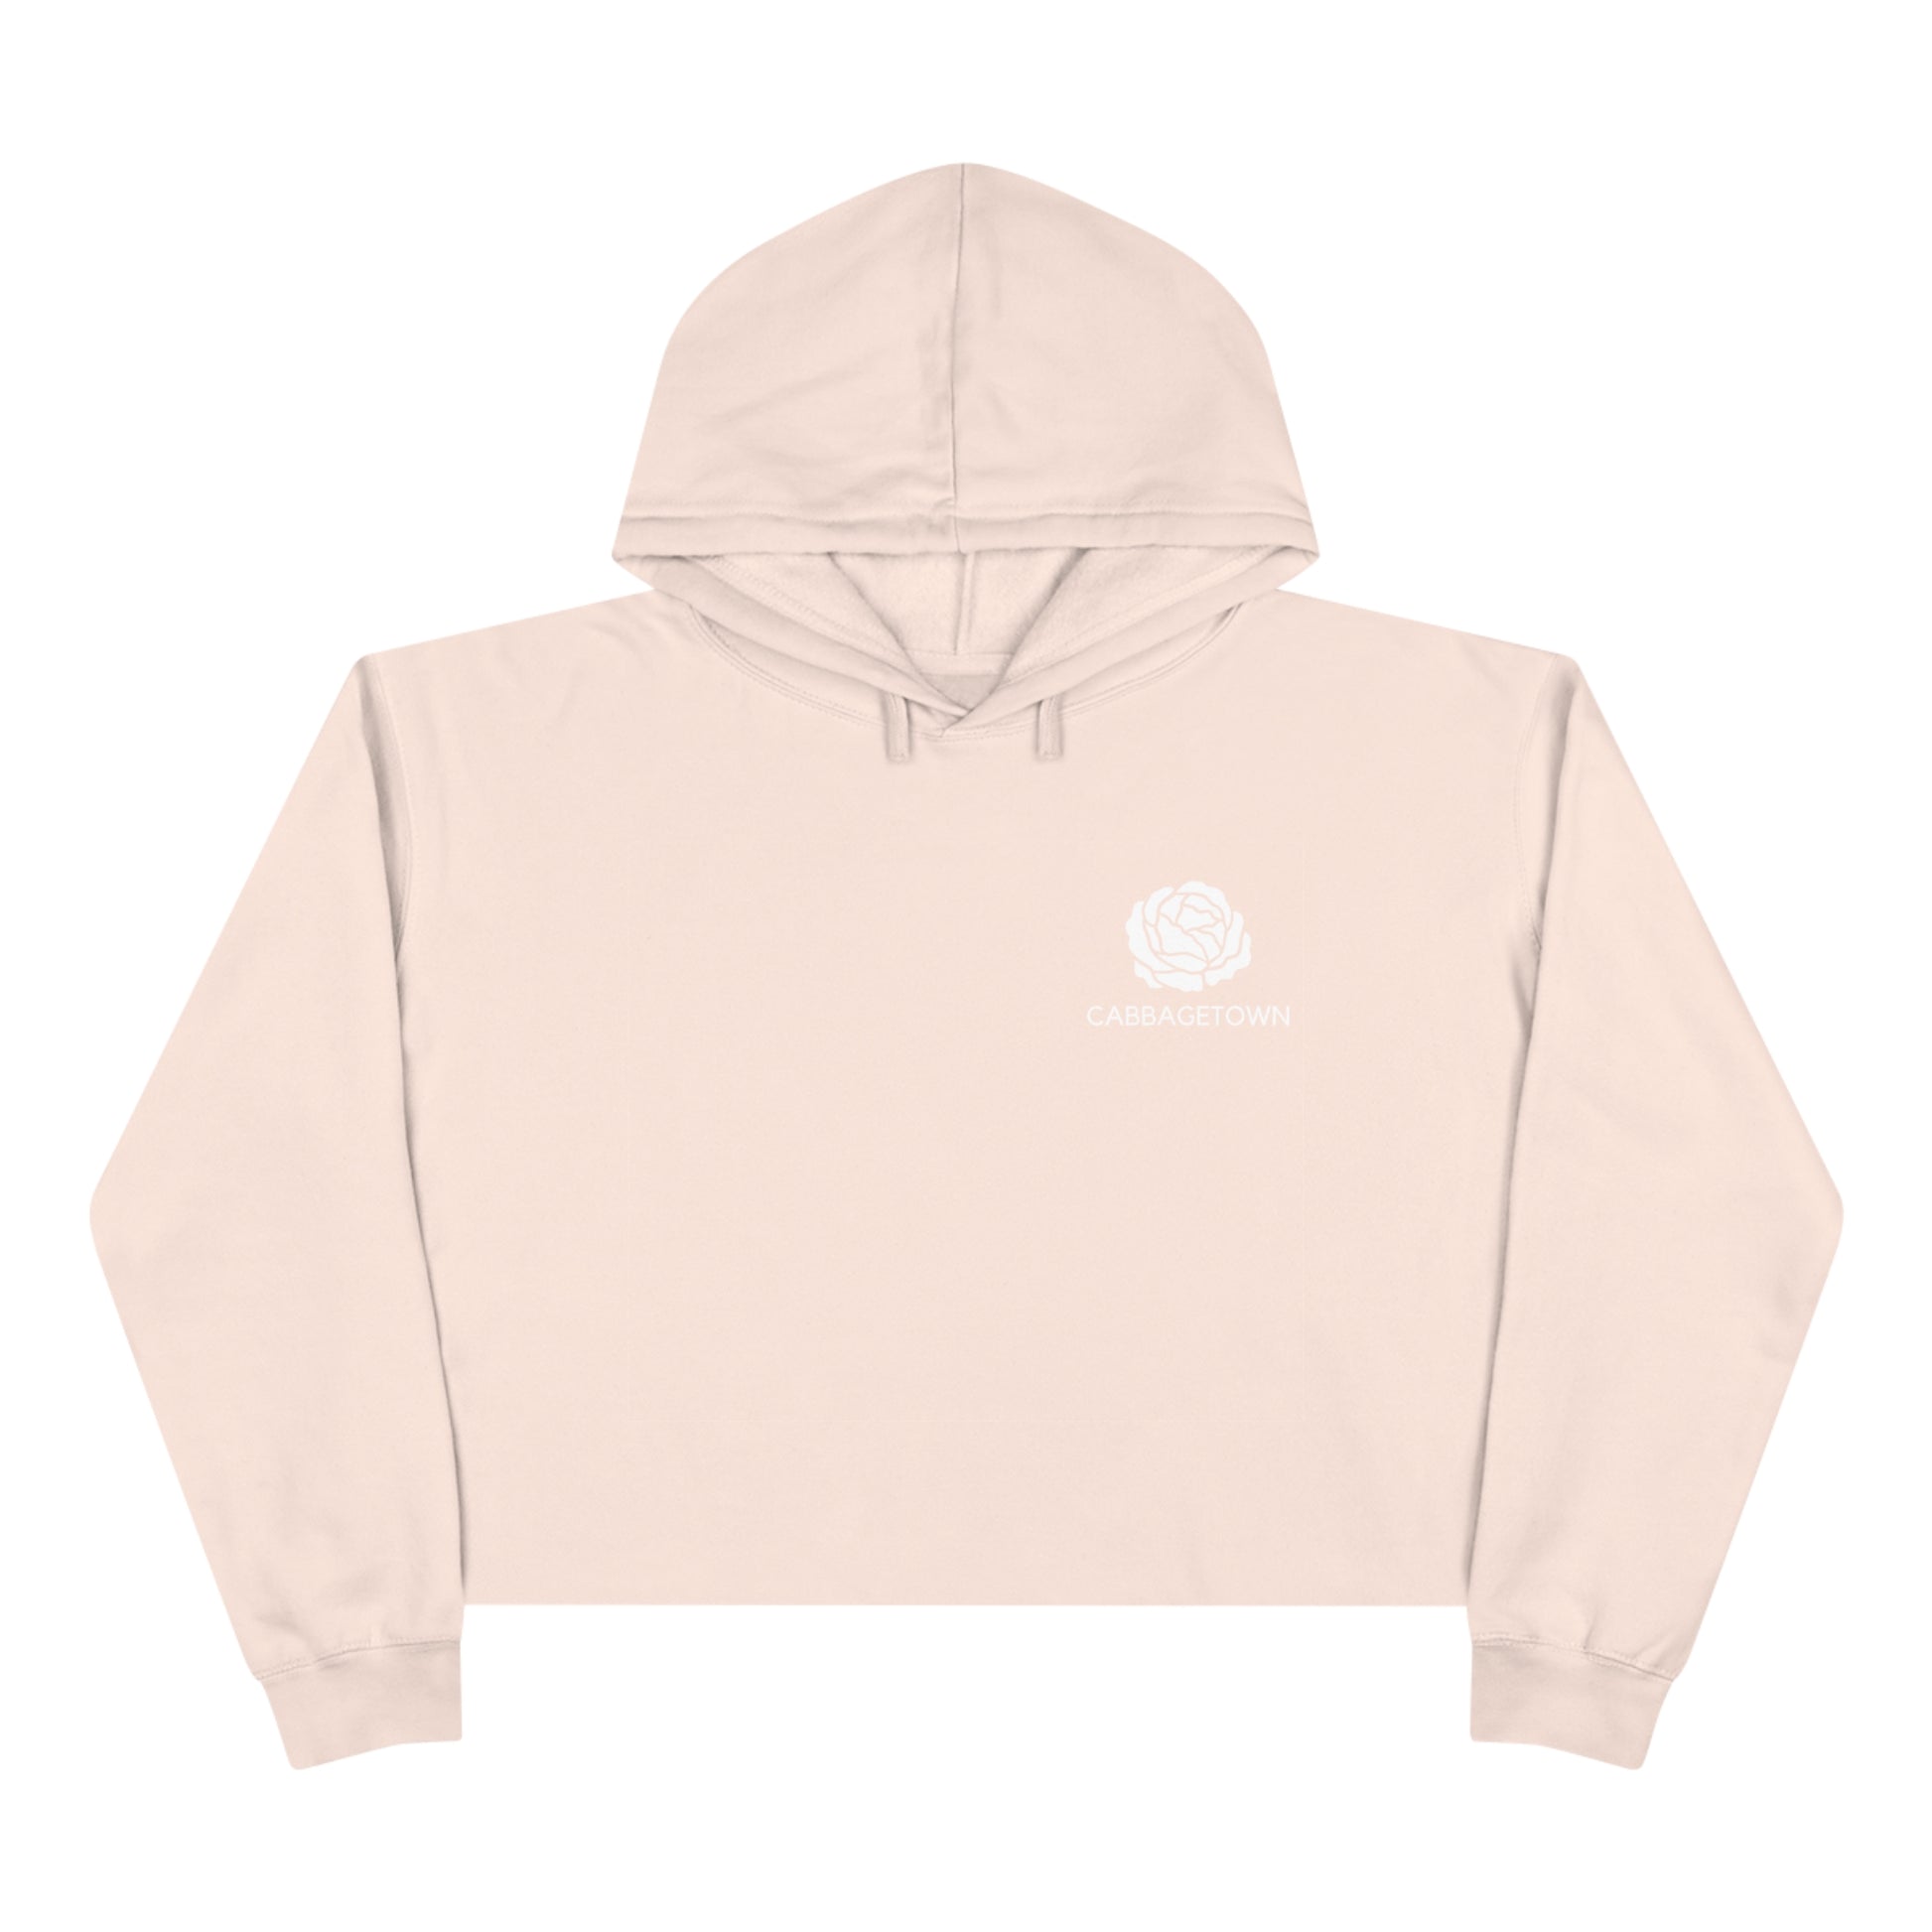 A pale pink Crop Hoodie with Monochrome Cabbagetown and Super Bargain Logo on the left chest area, displayed on a plain white background.